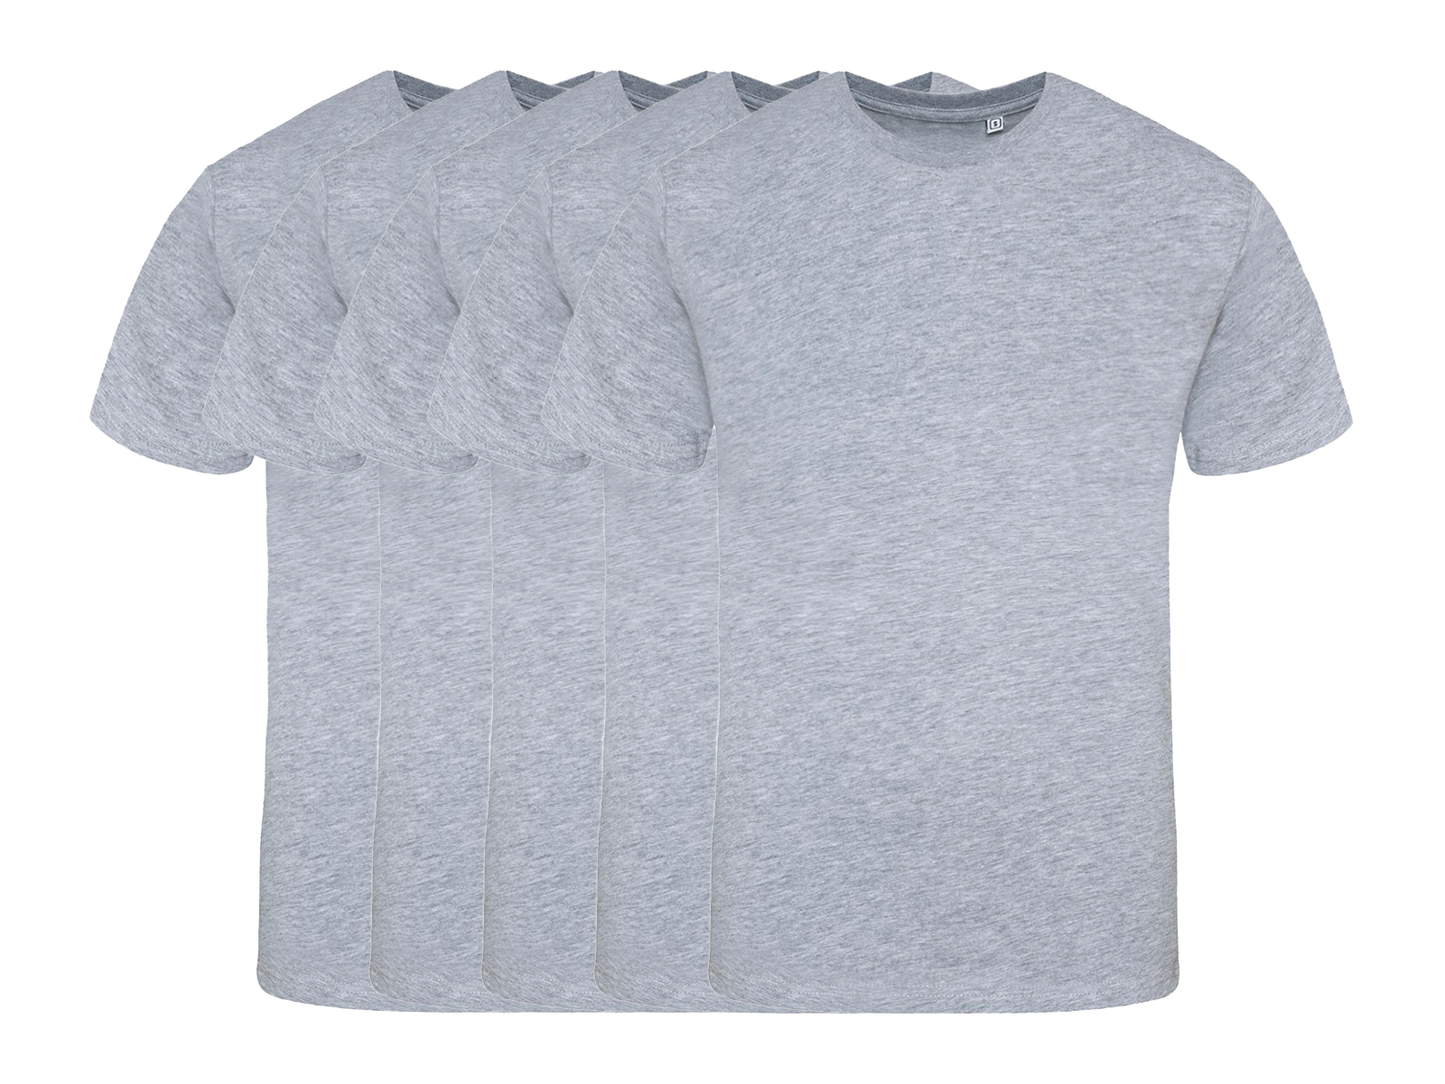 COOZO Contemporary Fit Pack of 5 Crew Neck Short Sleeve T-Shirts - COOZO